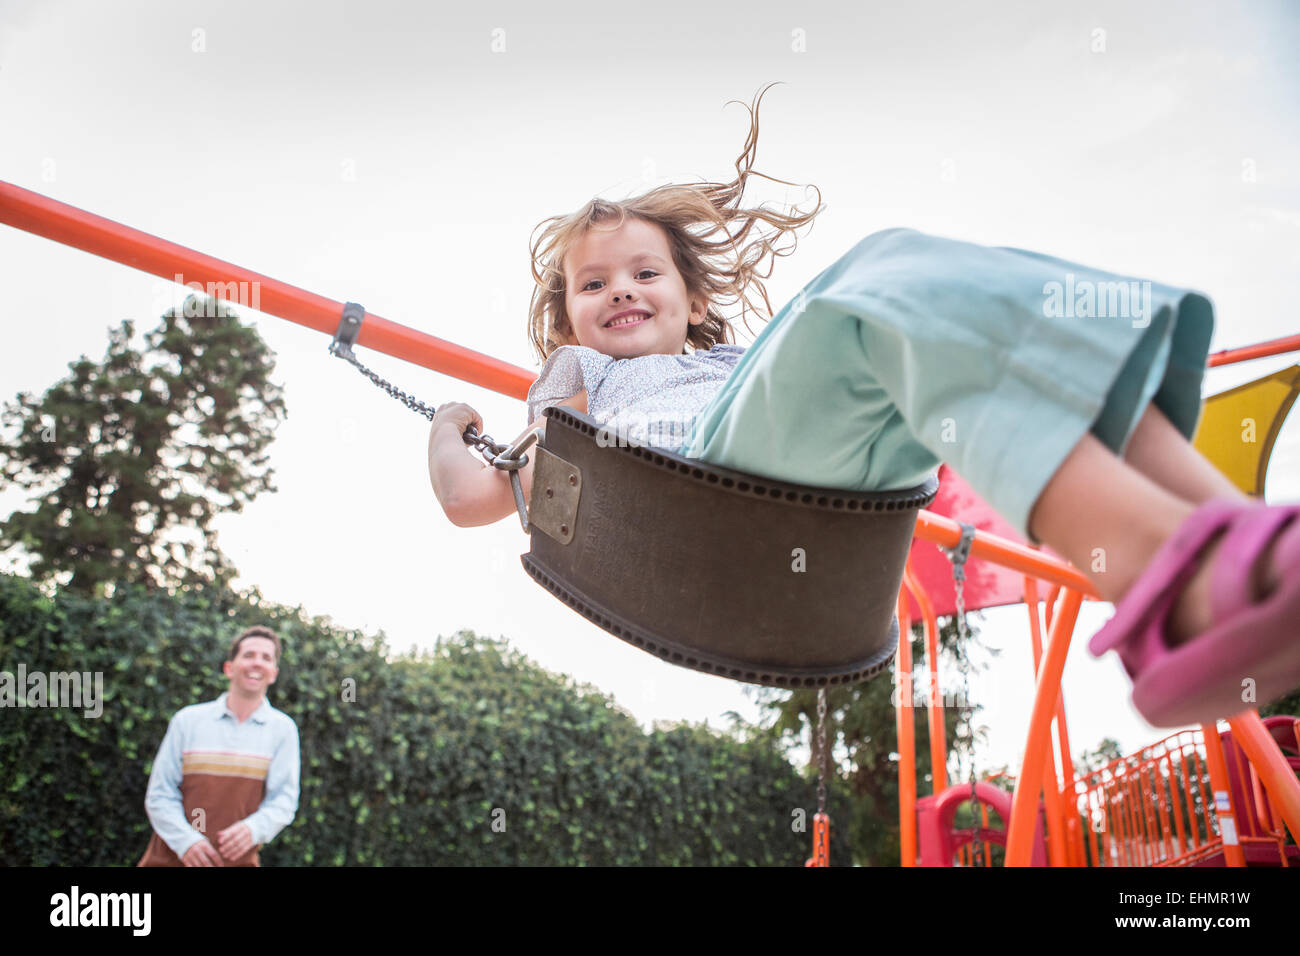 Young Girl fille poussant on swing Banque D'Images